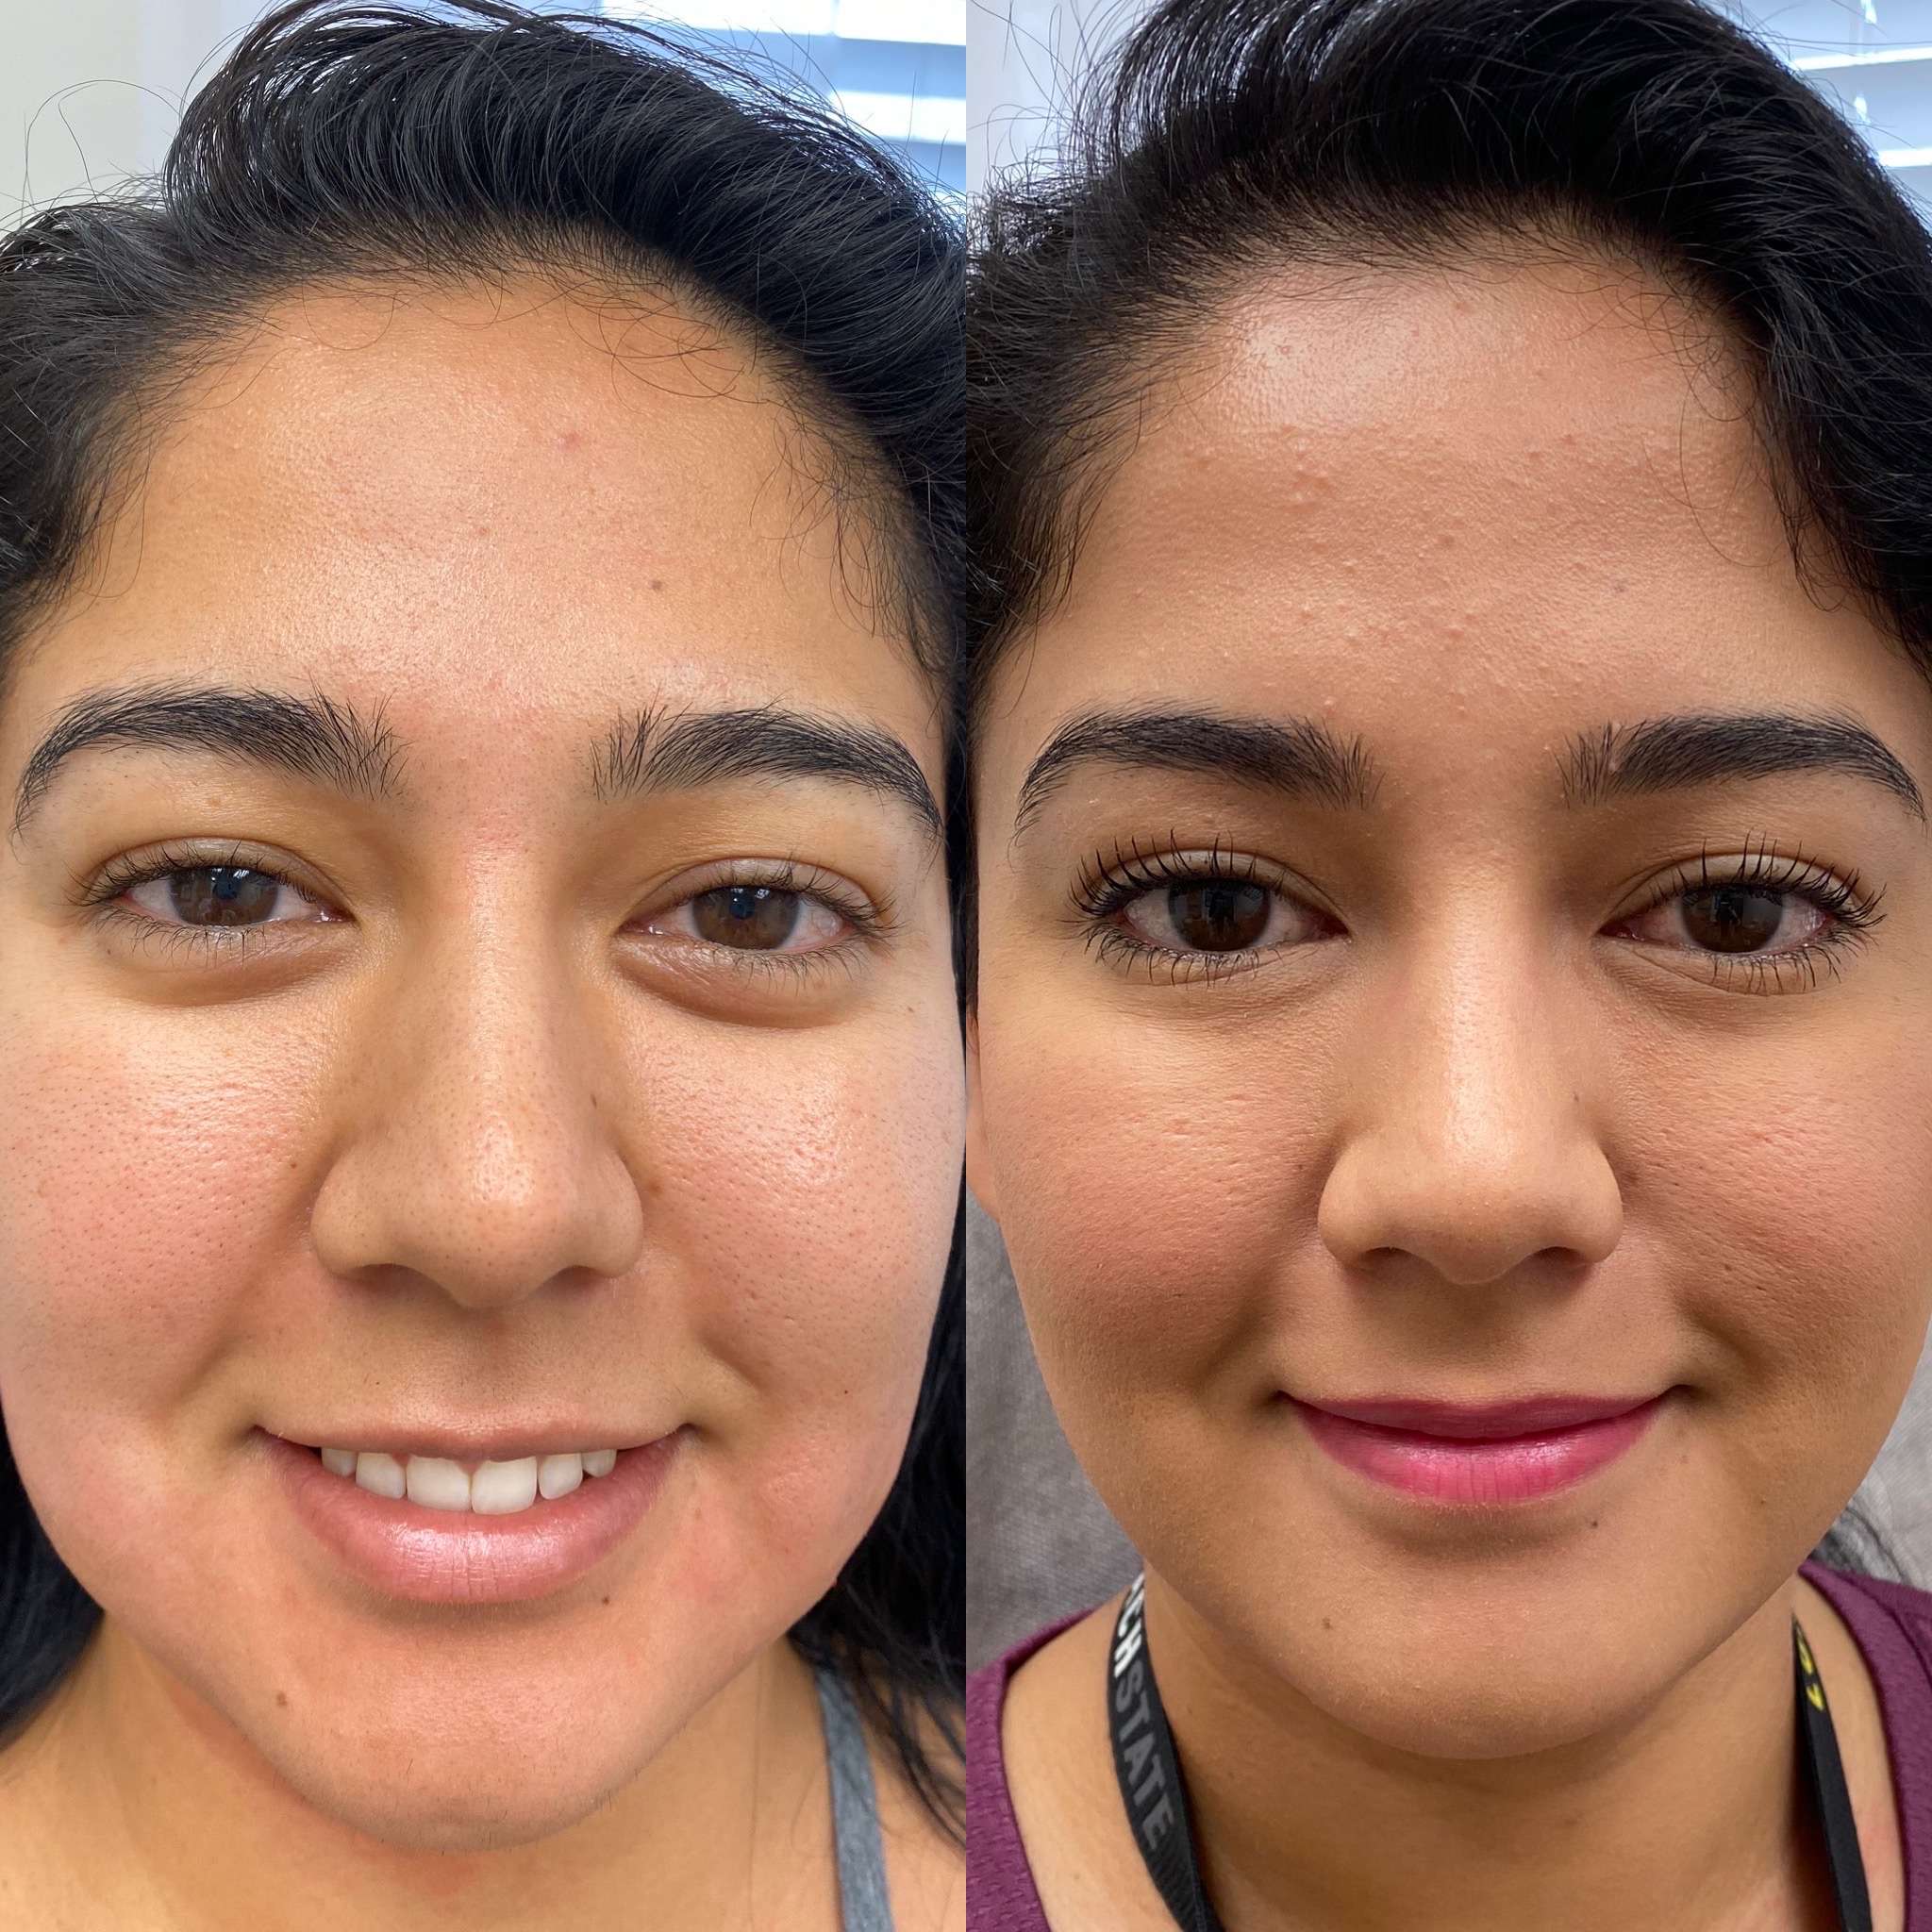 Before and After Botox Jelly Roll Treatment | Beauty Boost Med Spa in Newport Beach, CA